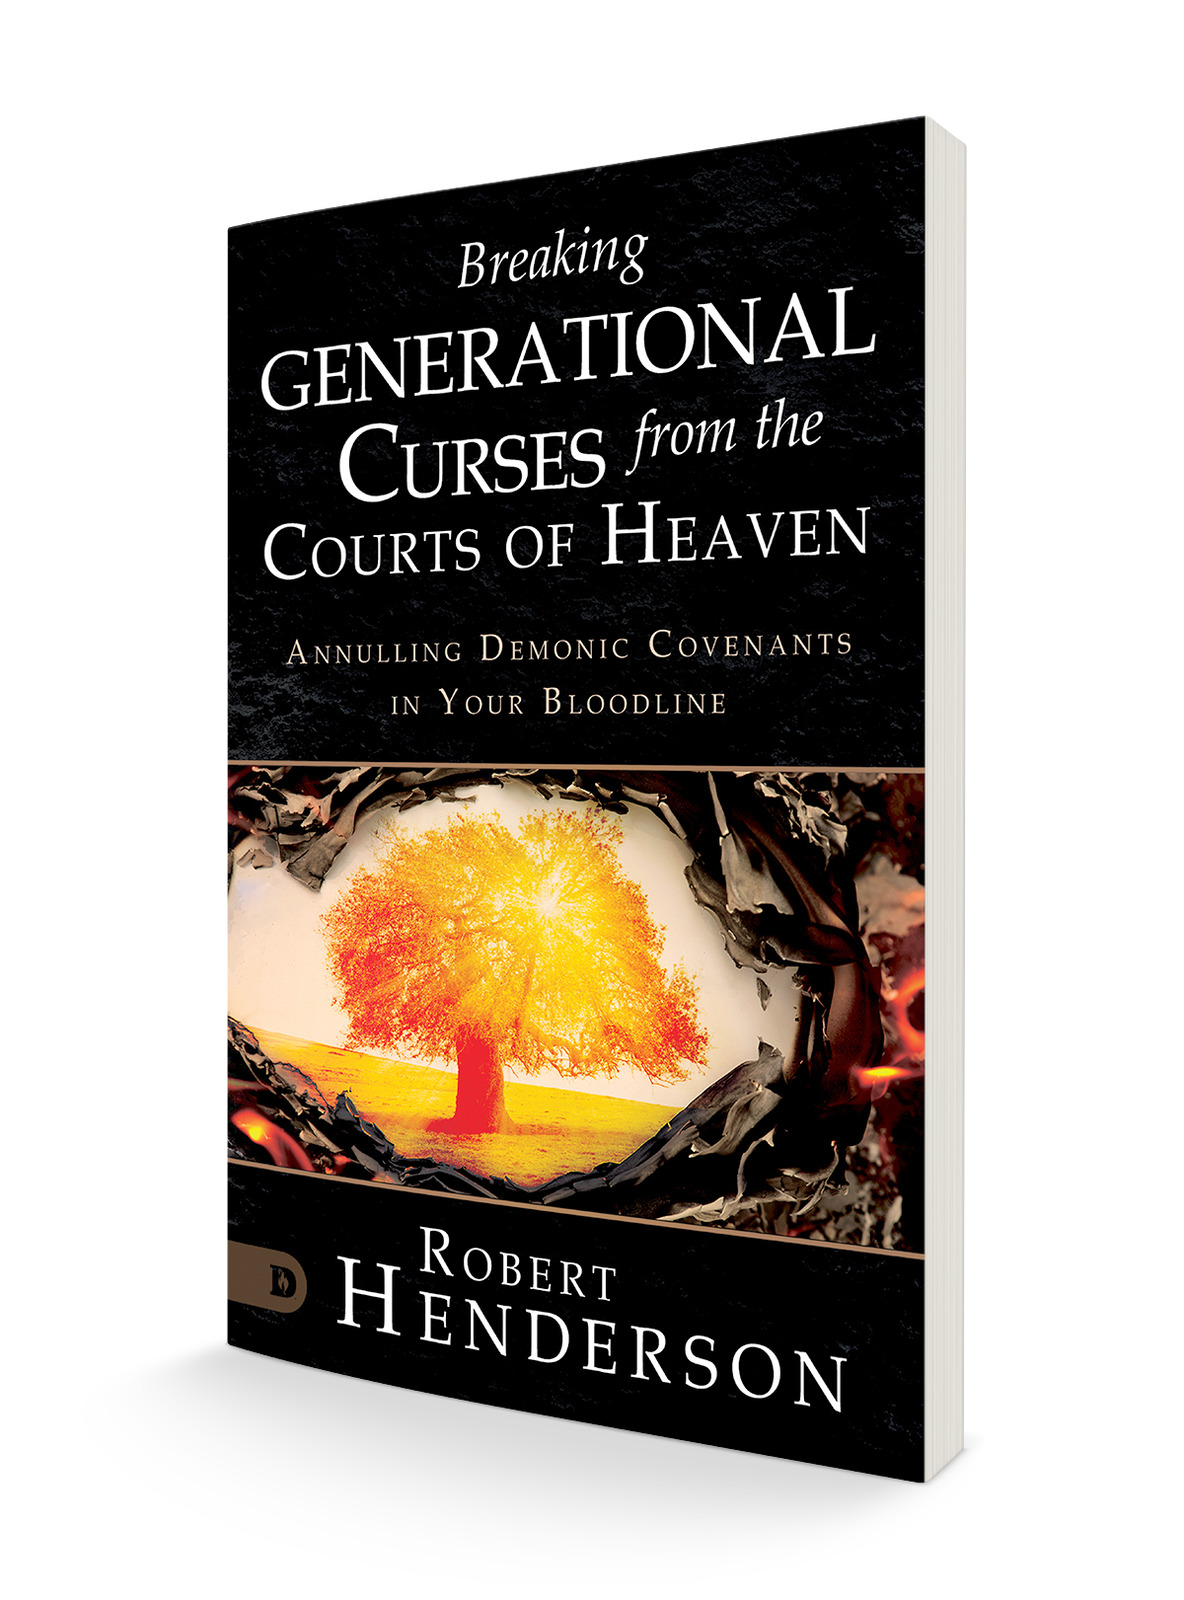 Breaking Generational Curses from the Courts of Heaven: Annulling Demonic Covena